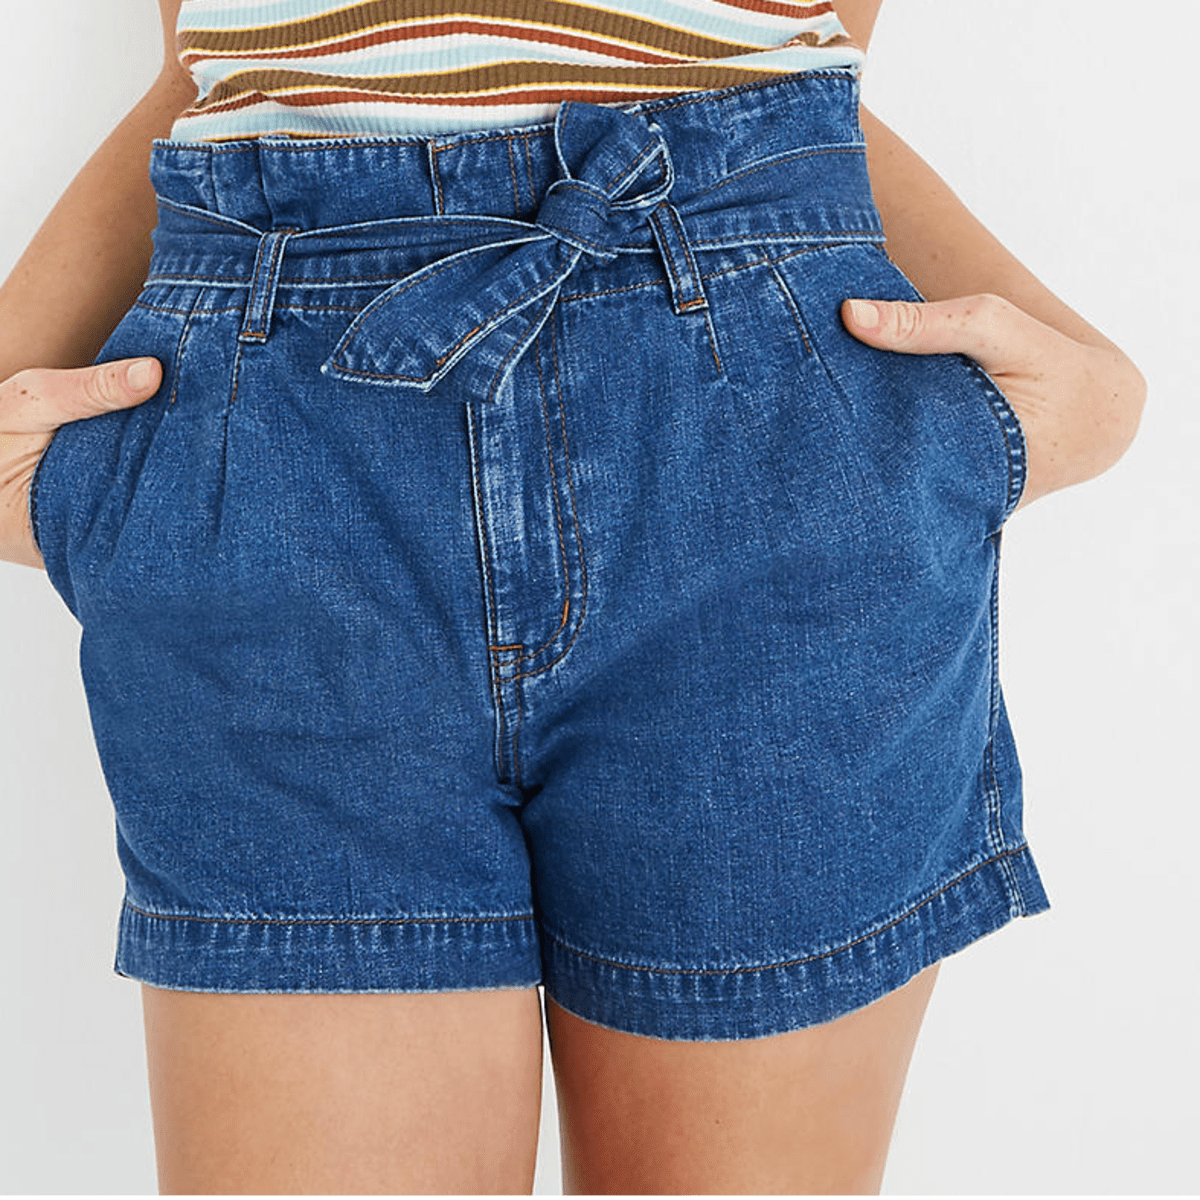 19 Pairs of Paperbag Shorts That'll 